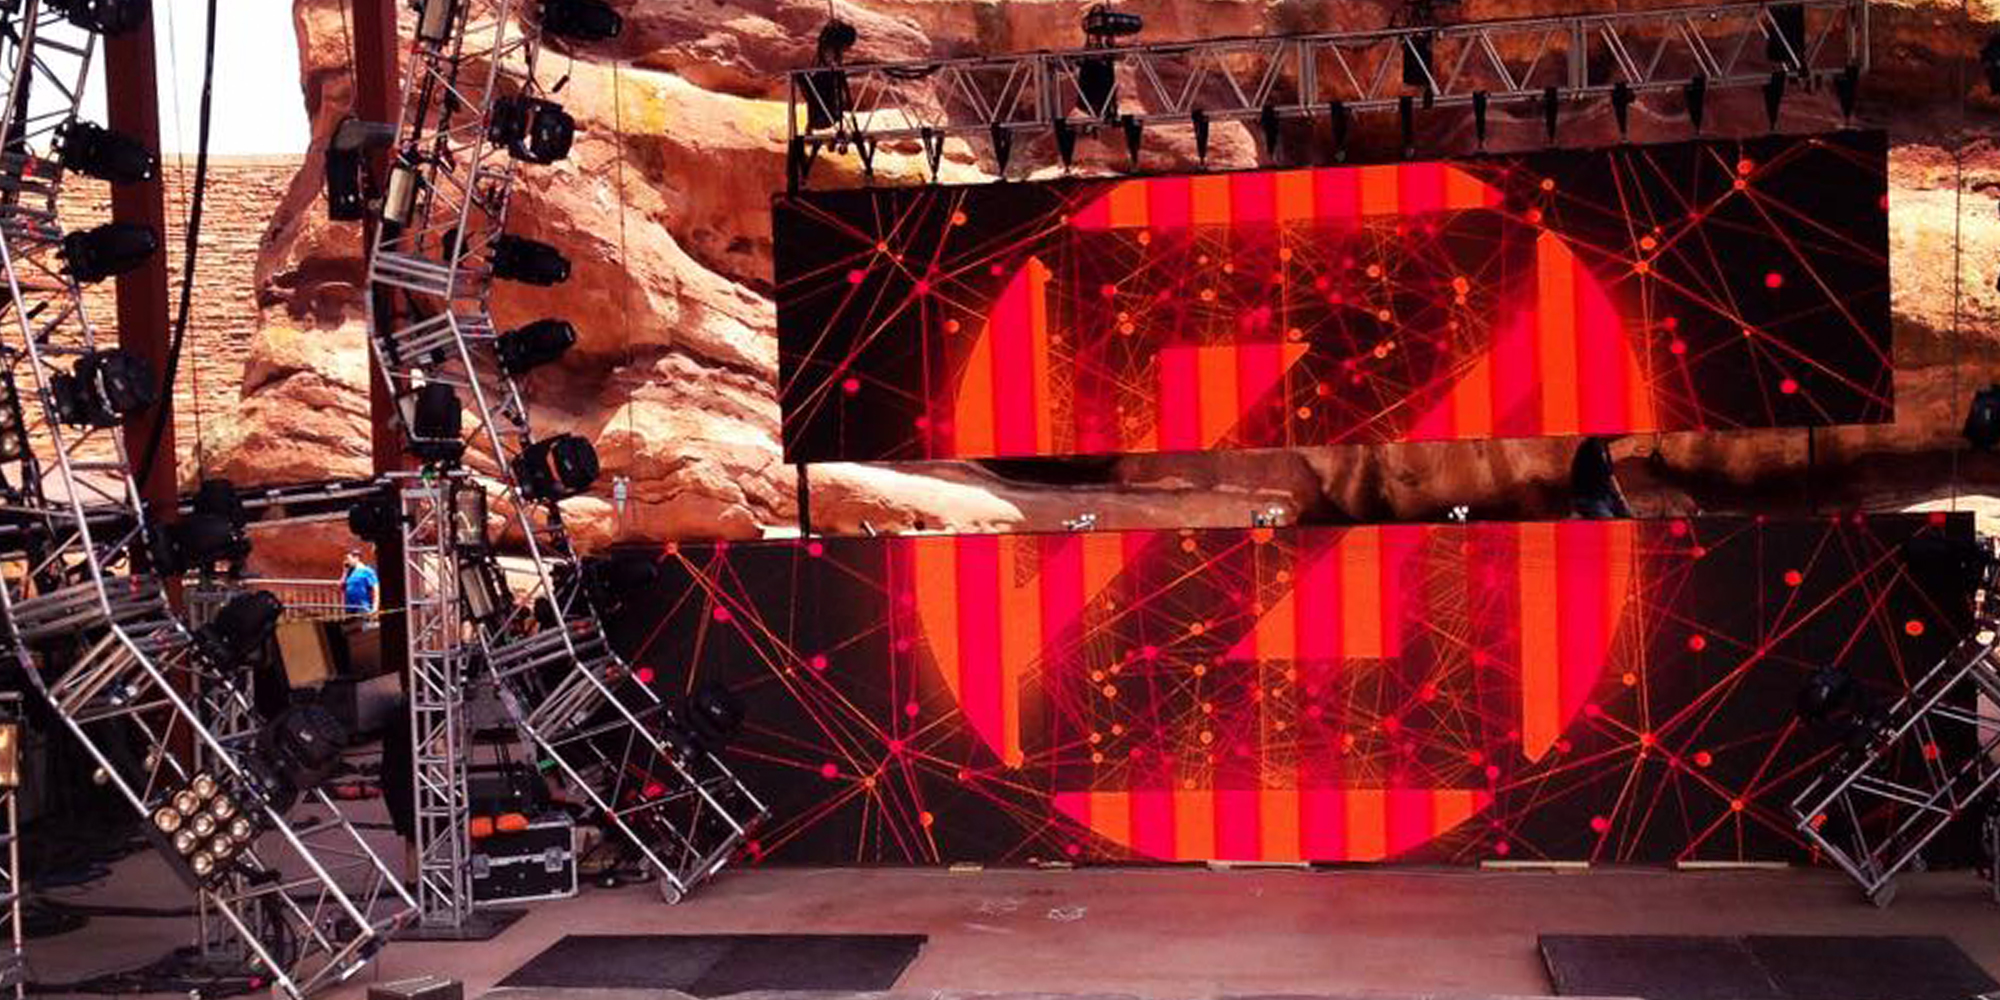 Rythm EFX is a Northern Colorado event planning company that offers led video walls